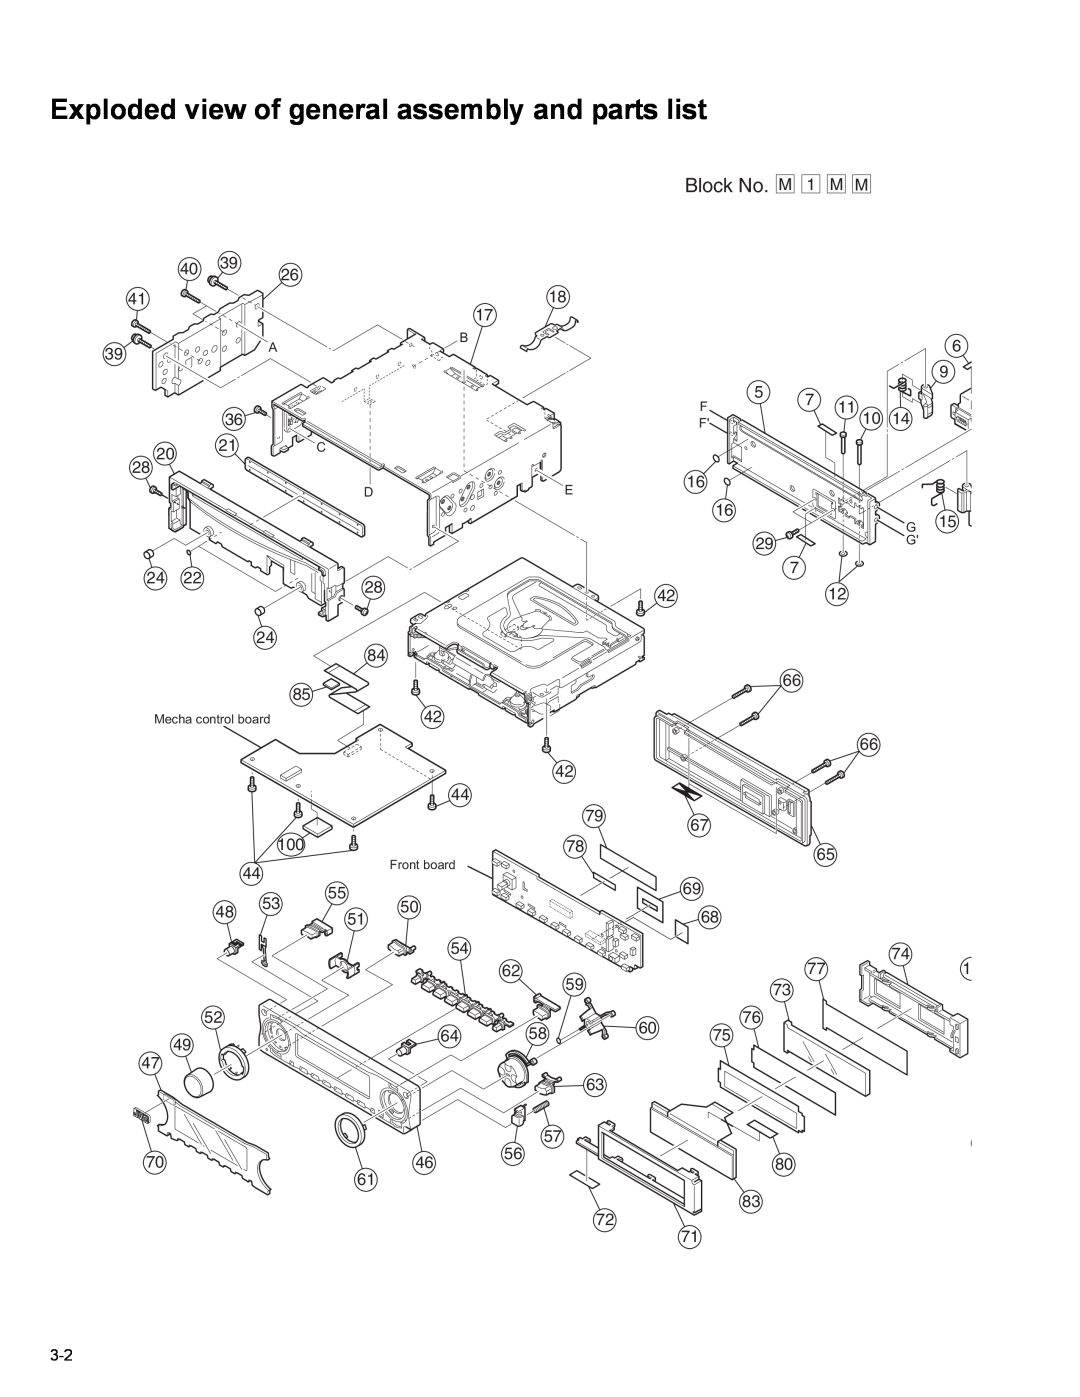 JVC KD-LH401 service manual Exploded view of general assembly and parts list, Block No. M 1 M M, 40 39, 20 21 C, 11 10 